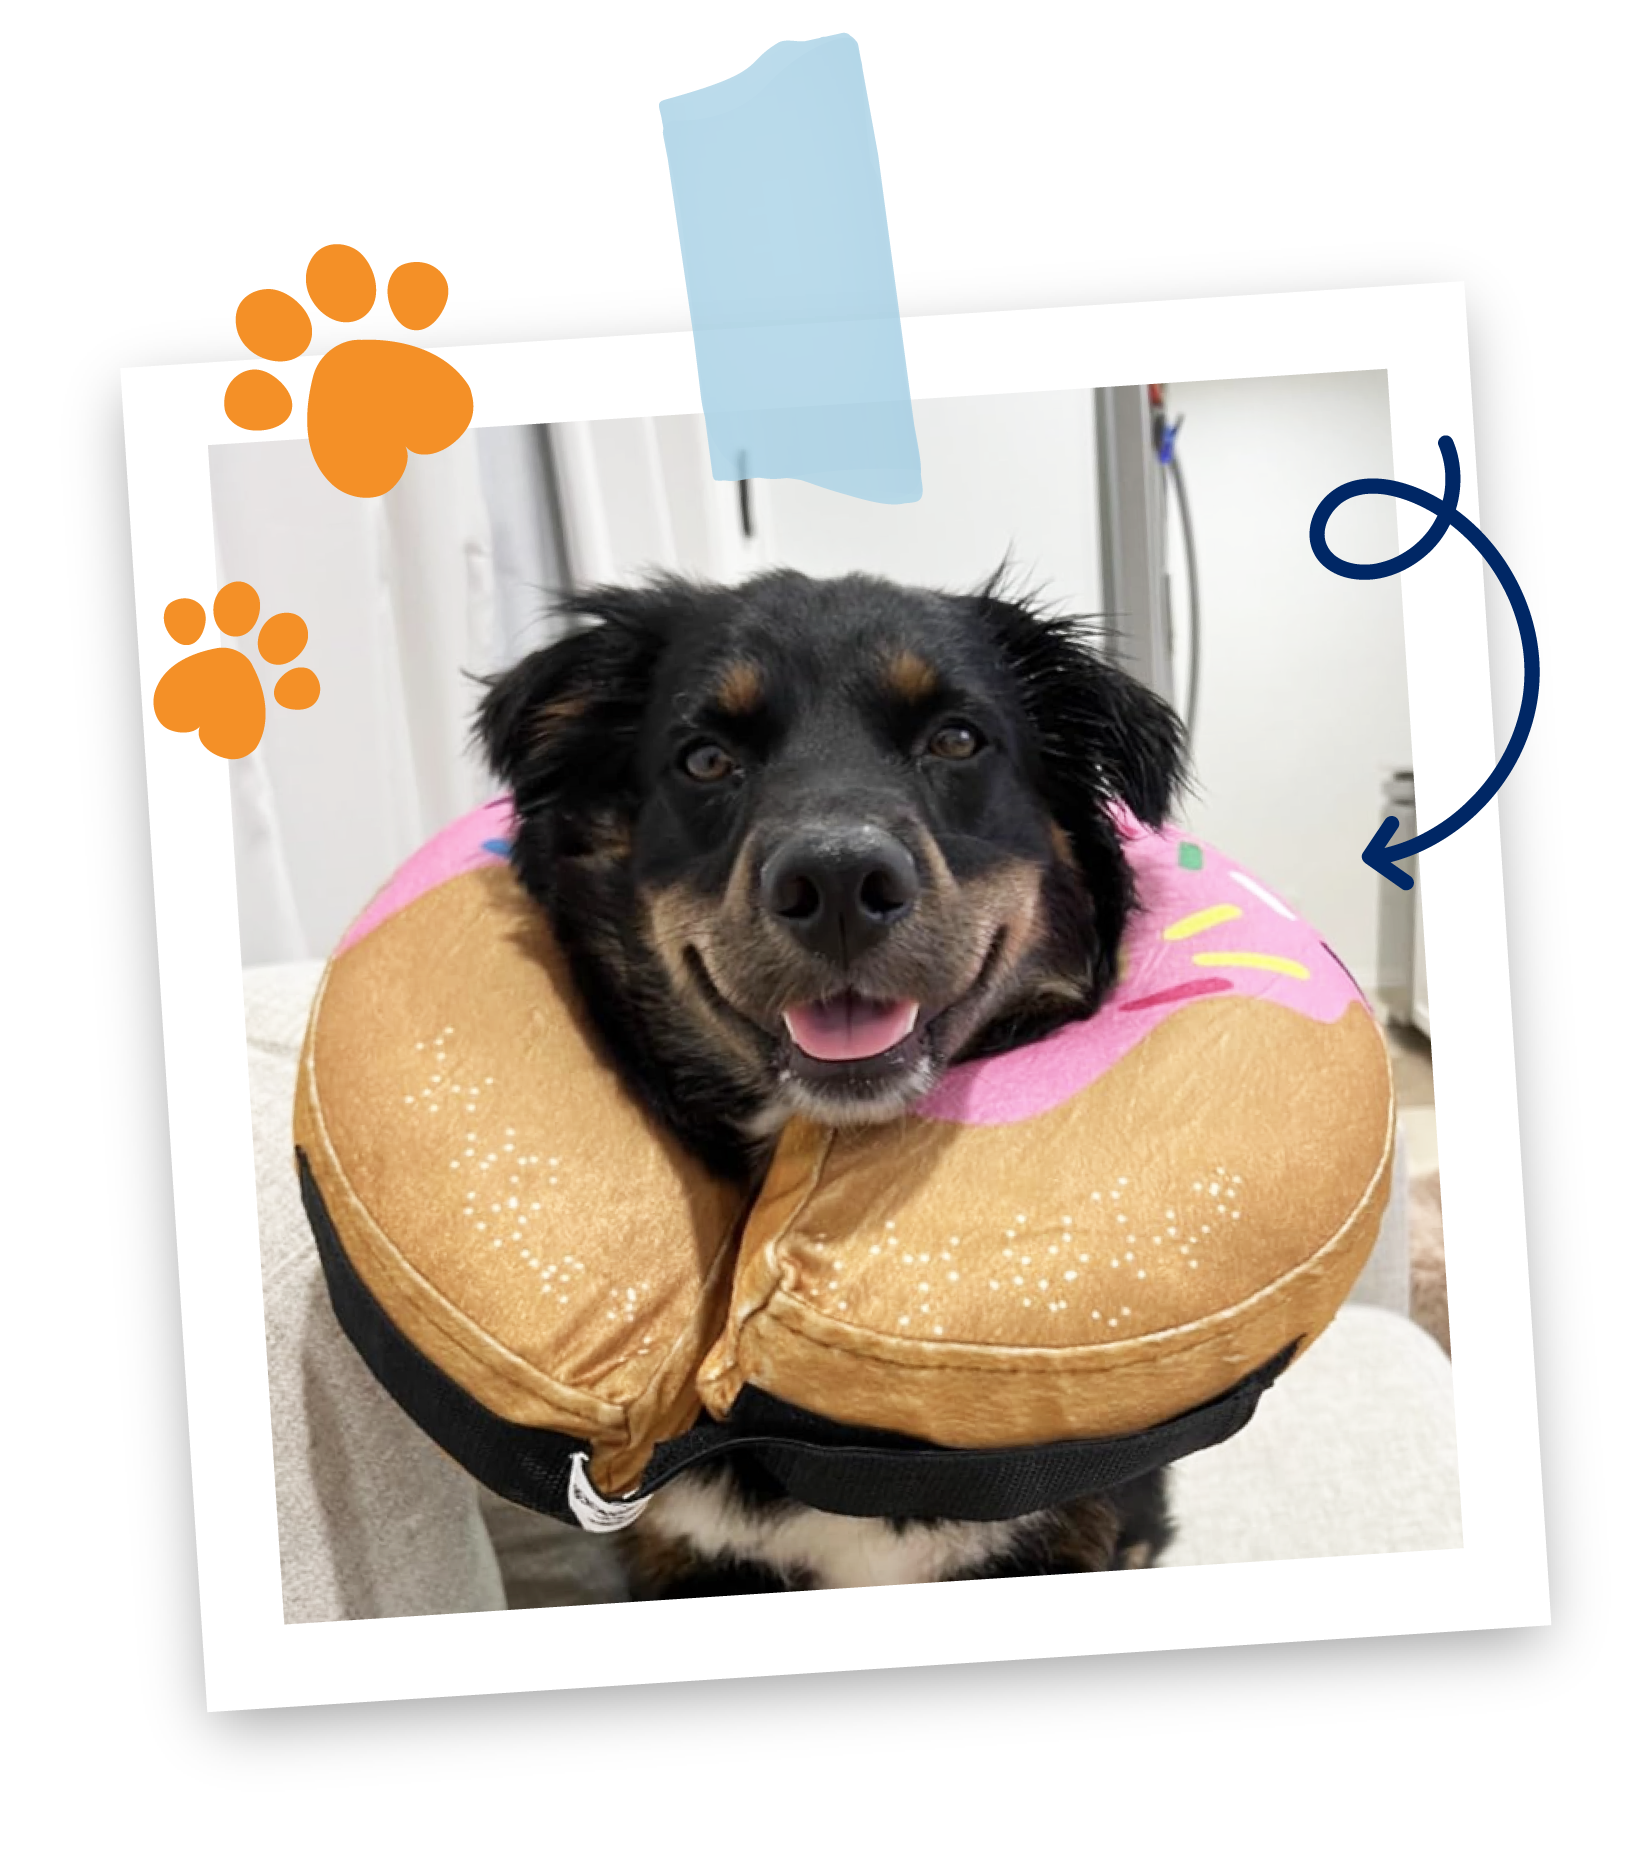 a polaroid of a black and brown dog smiling and wearing a pink donut design inflatable collar